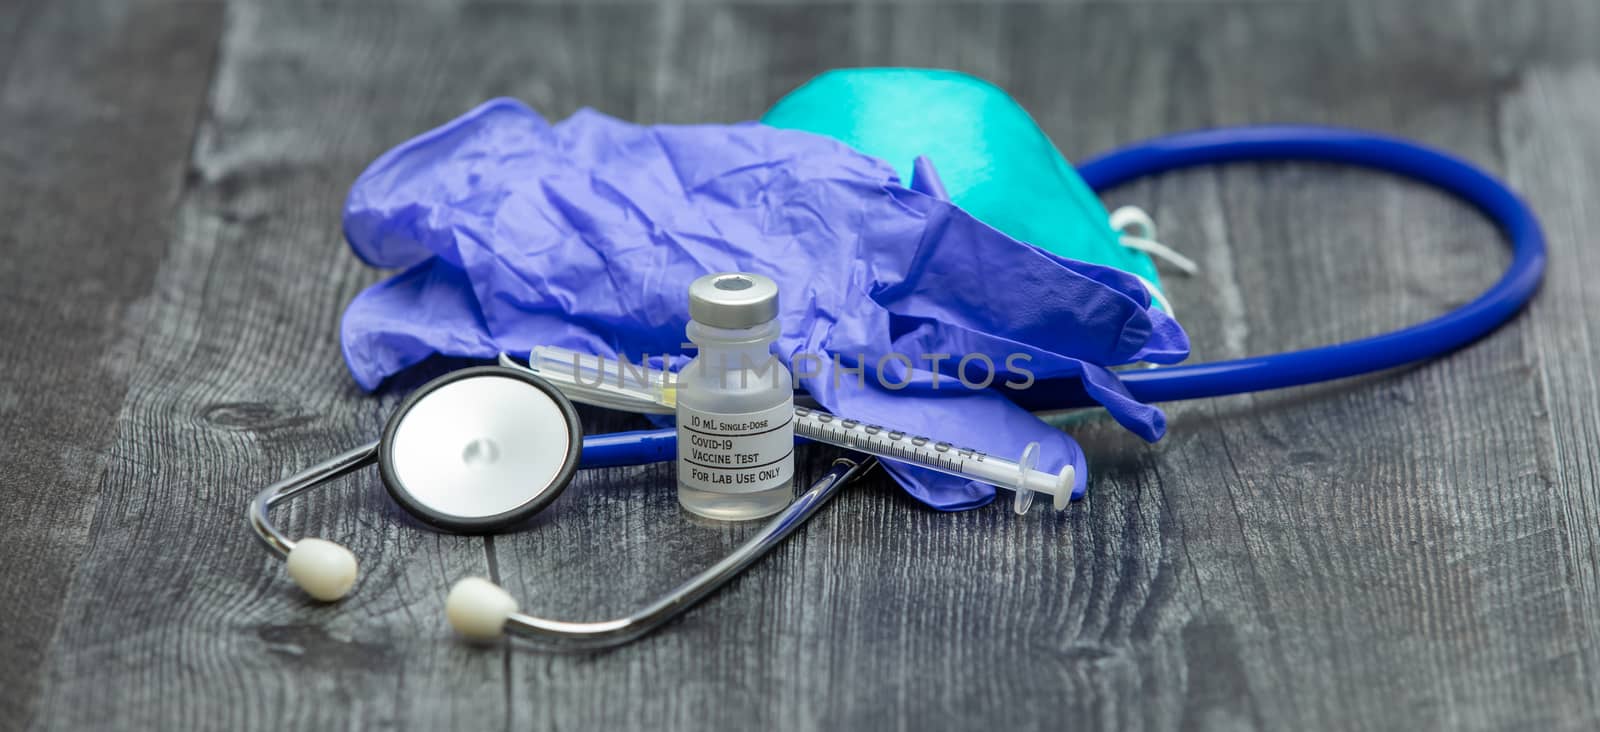 A blue medical stethoscope, face mask respirator, gloves, syringe and vial of covid-19 test vaccine on a wooden surface.